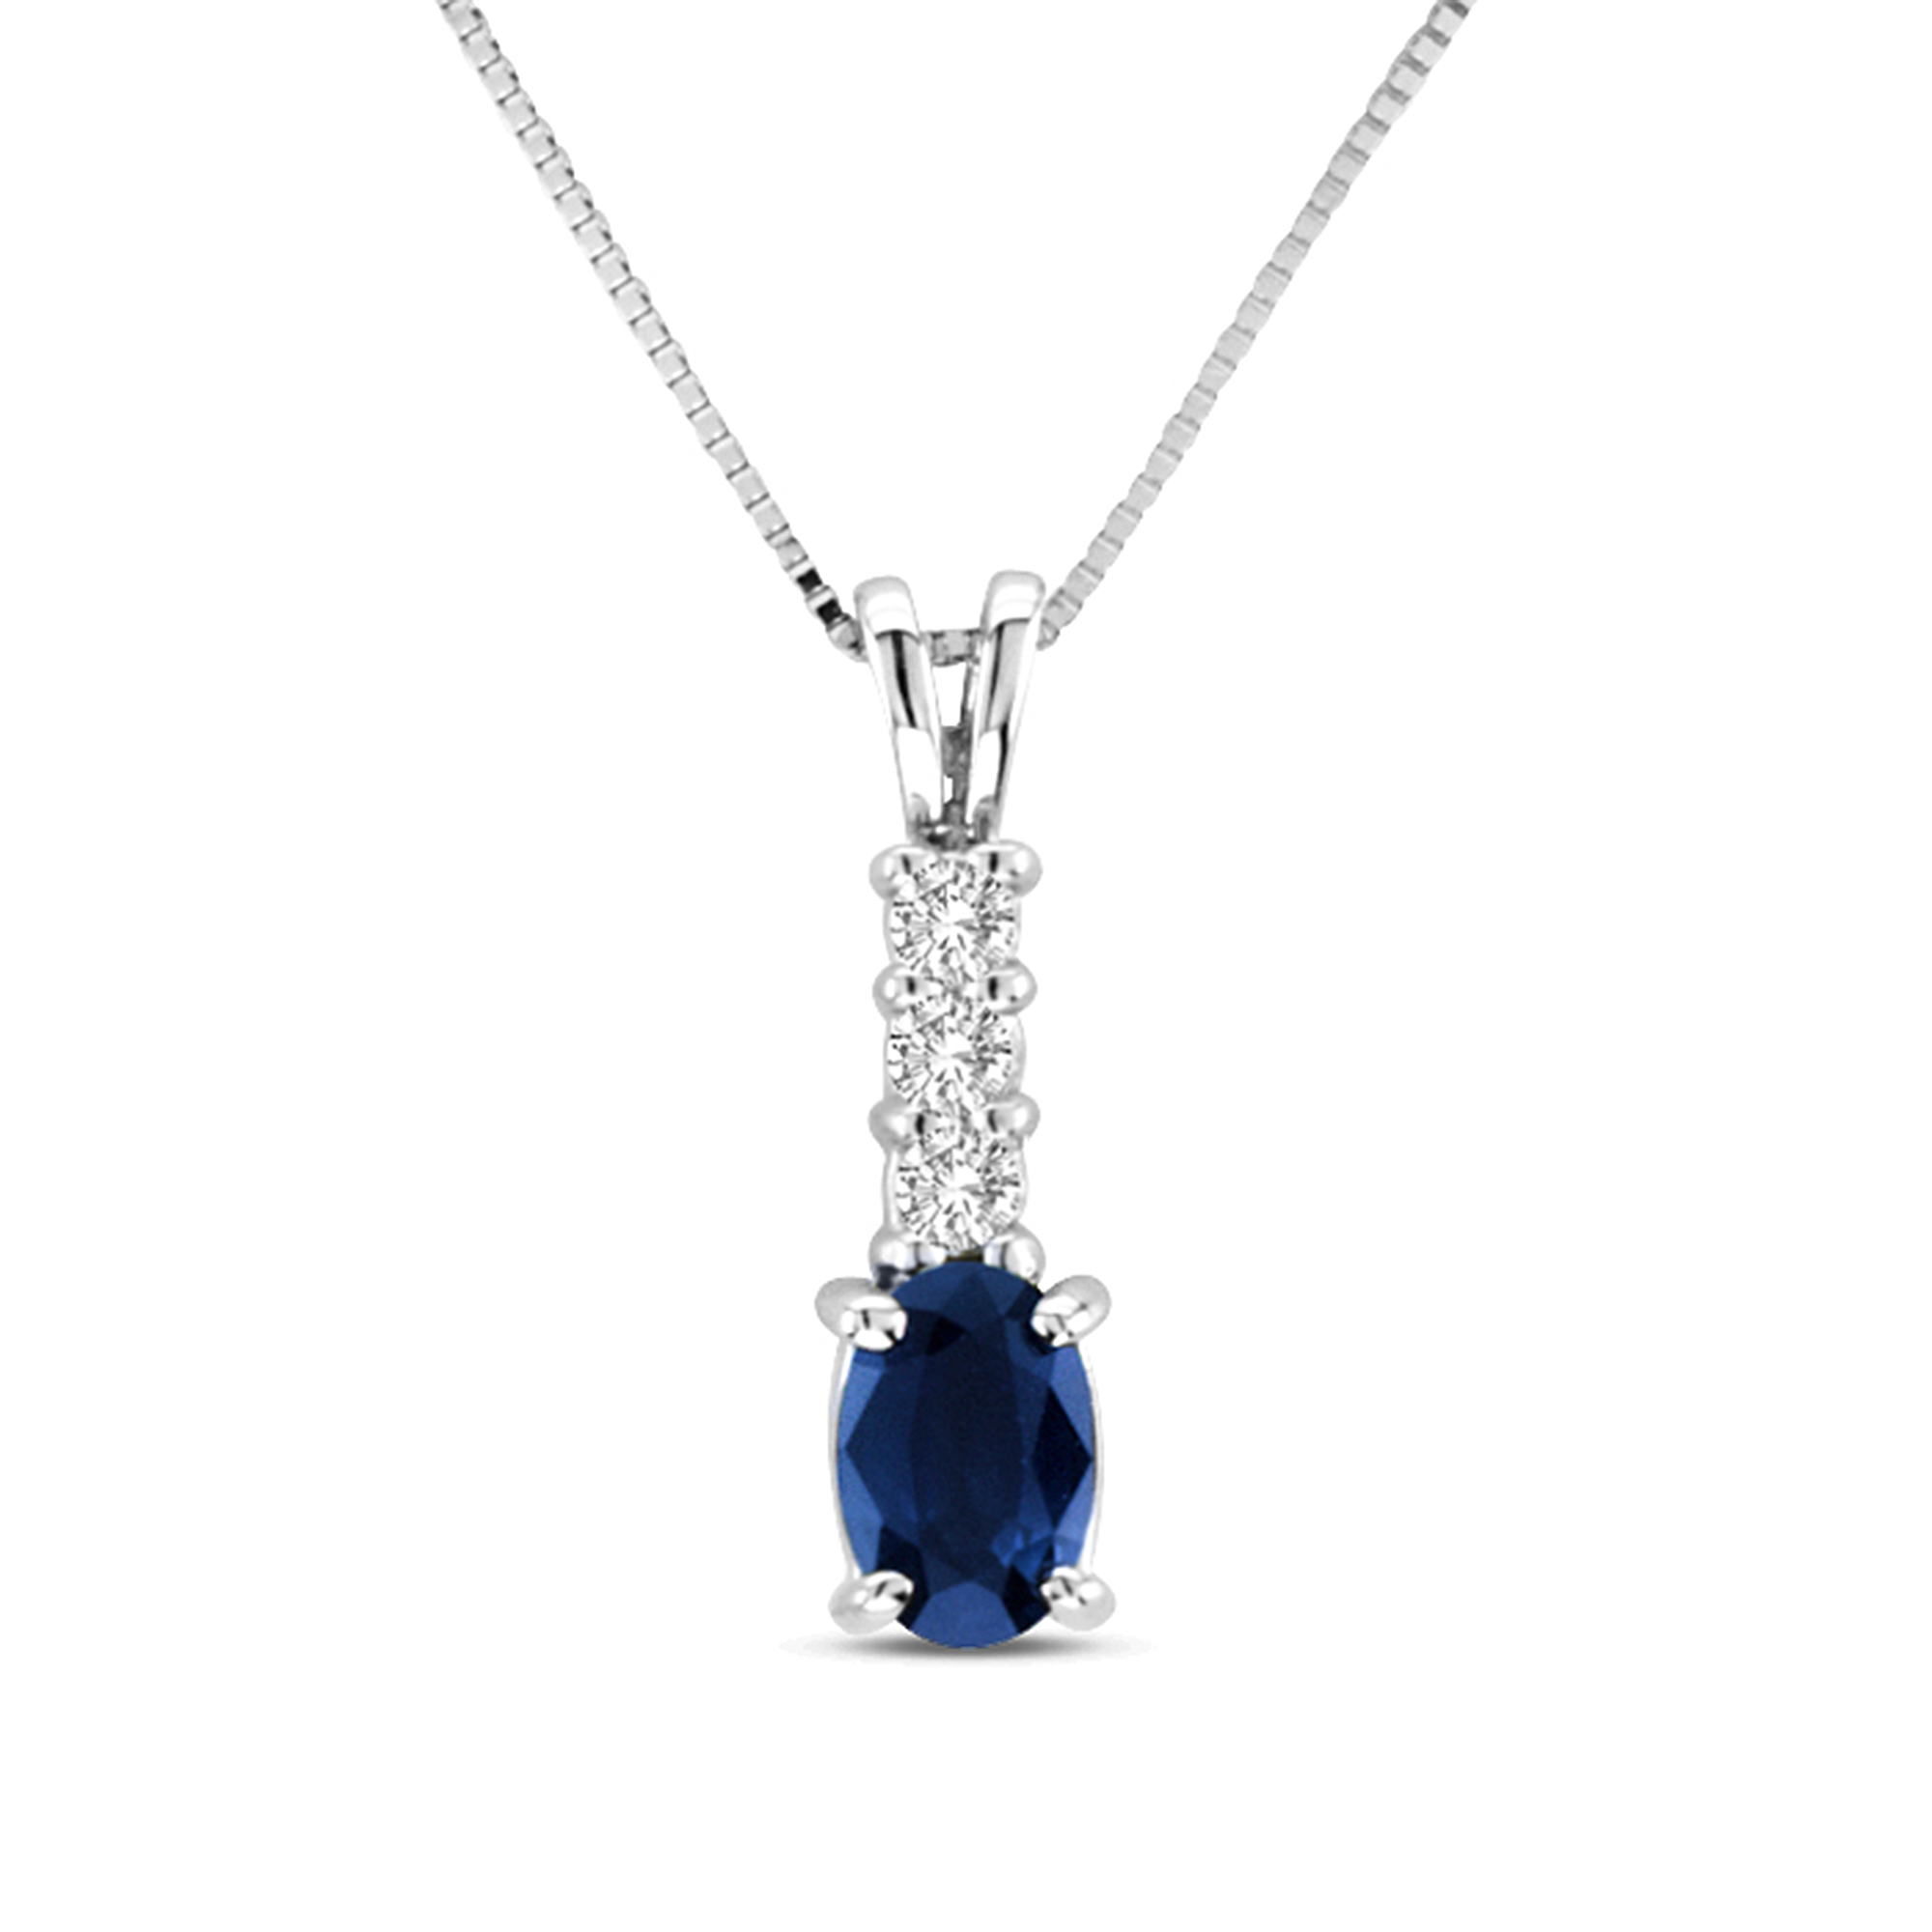 View 0.60cttw Sapphire and Diamond Pendant in 14K Gold